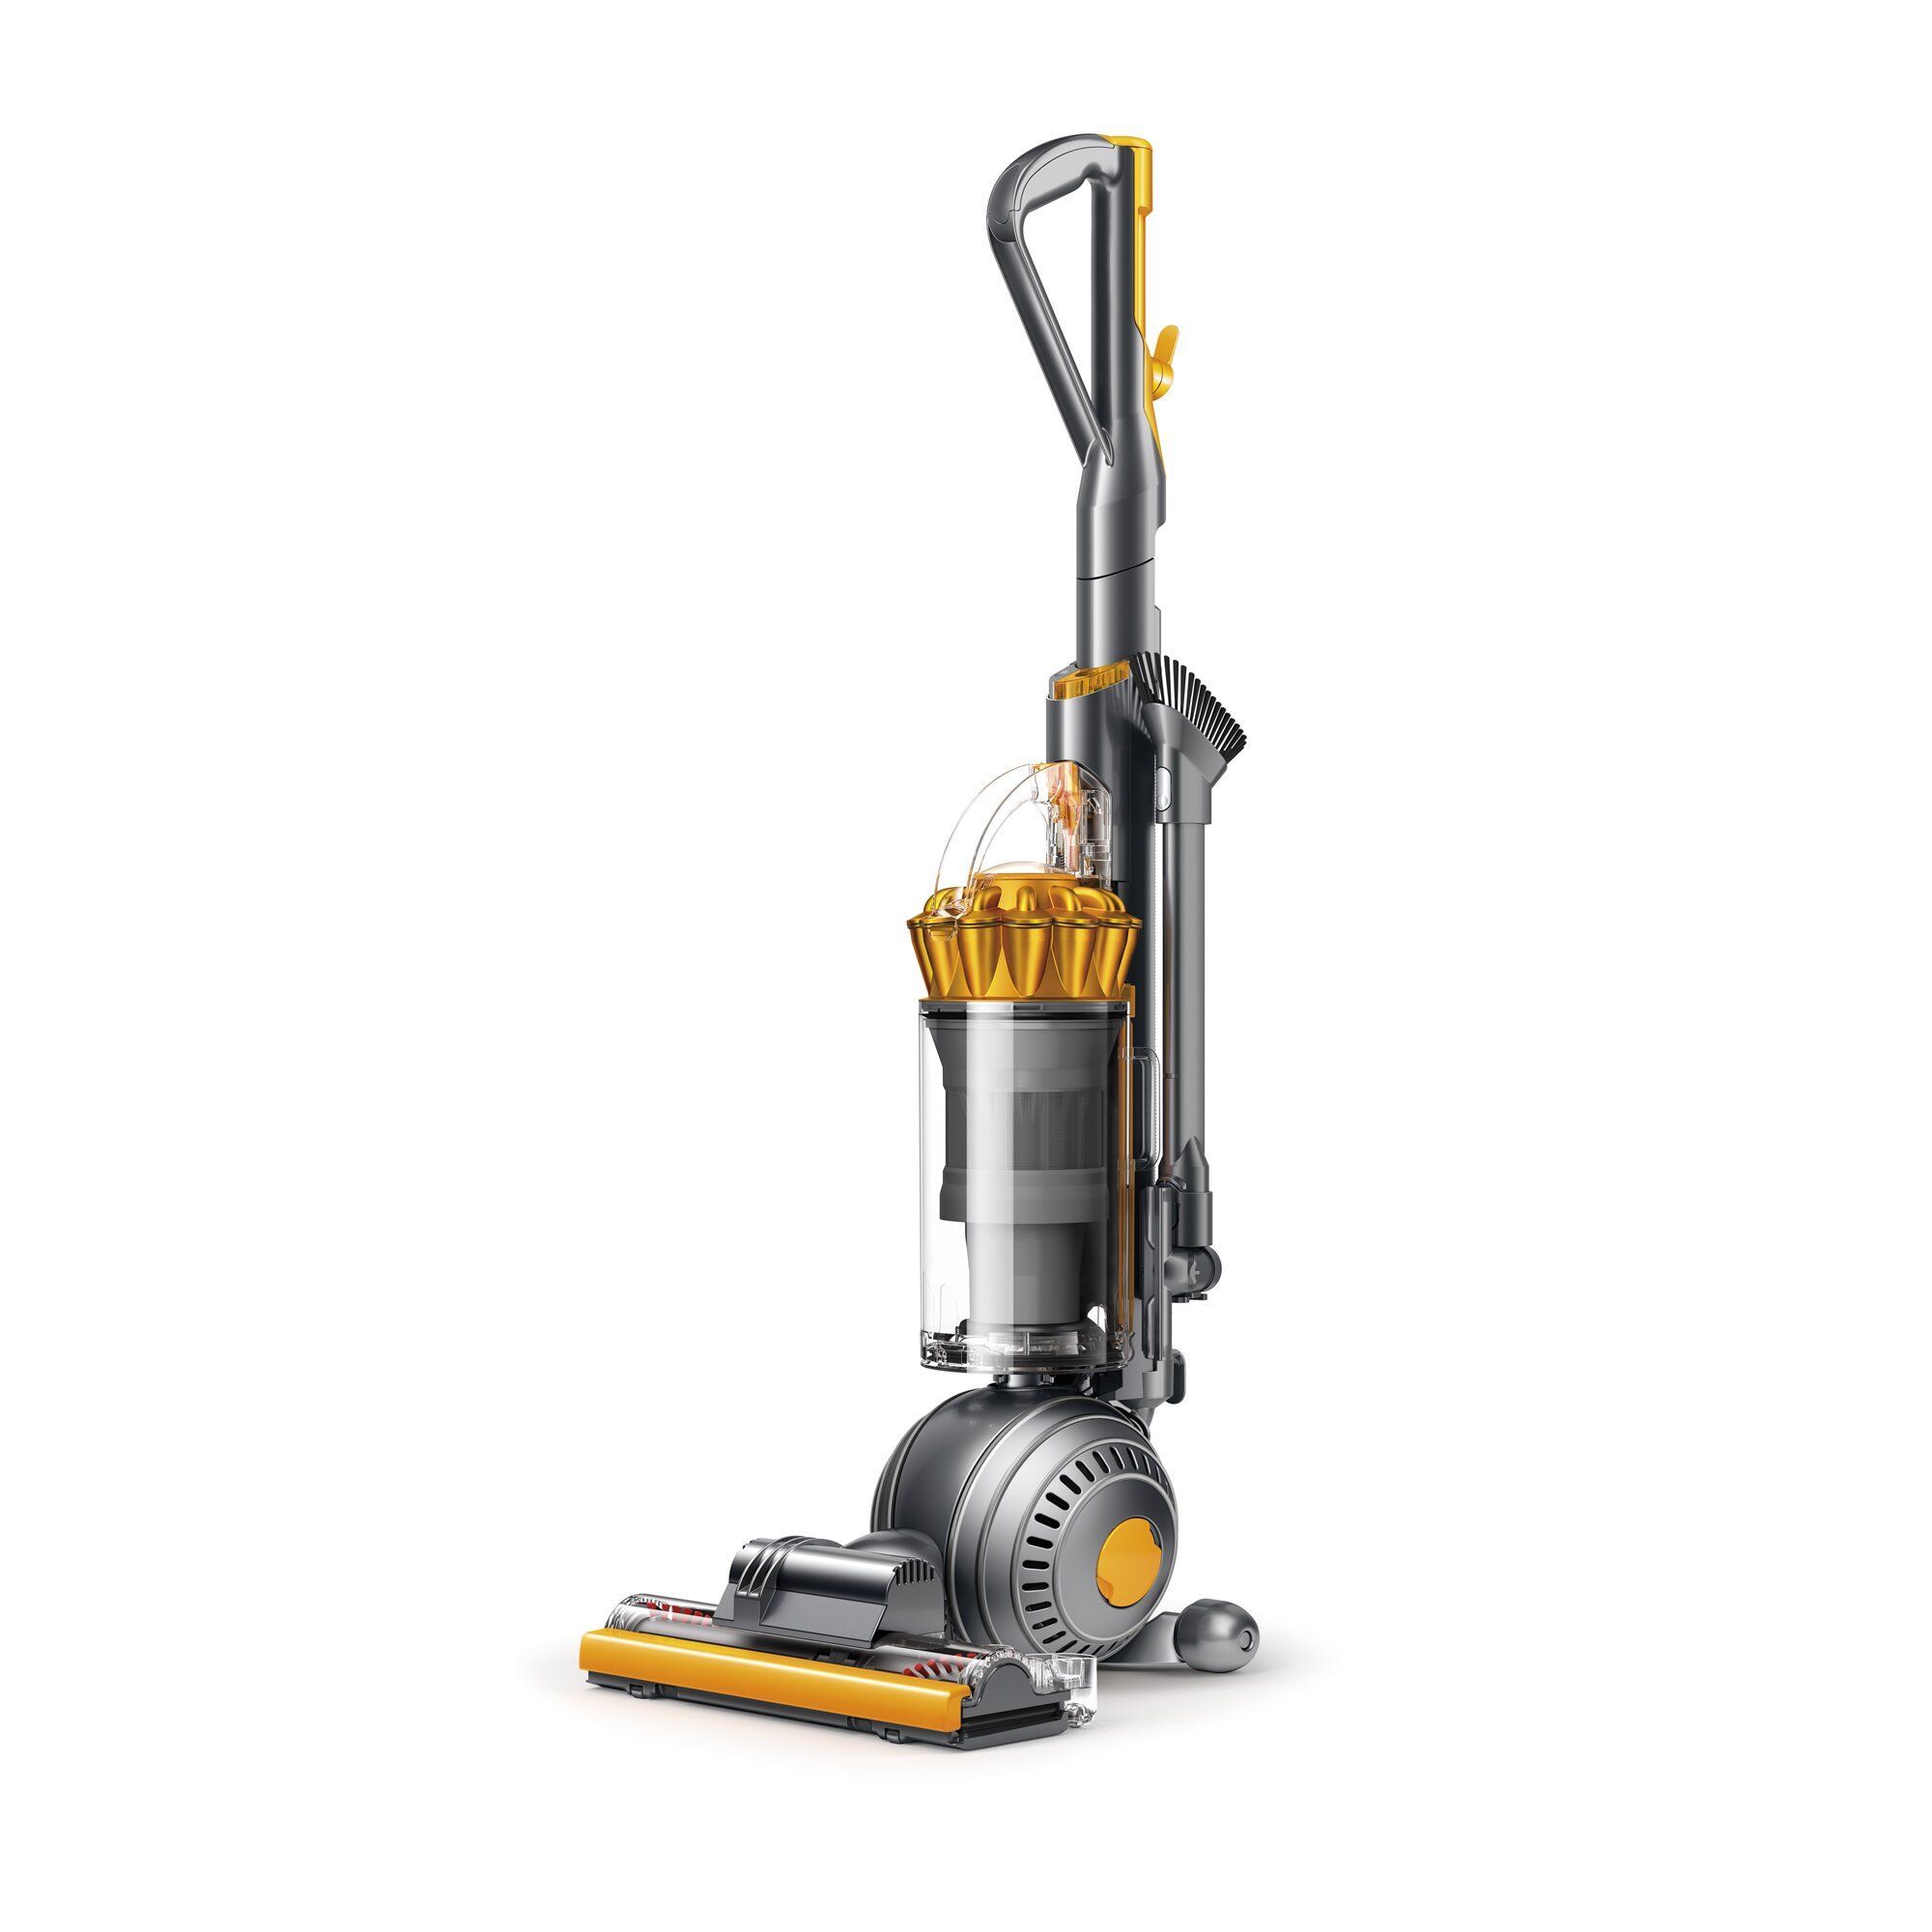 The Best 8 Dyson Vacuums In 2021, Best Dyson Vacuum Cleaner For Hardwood Floors